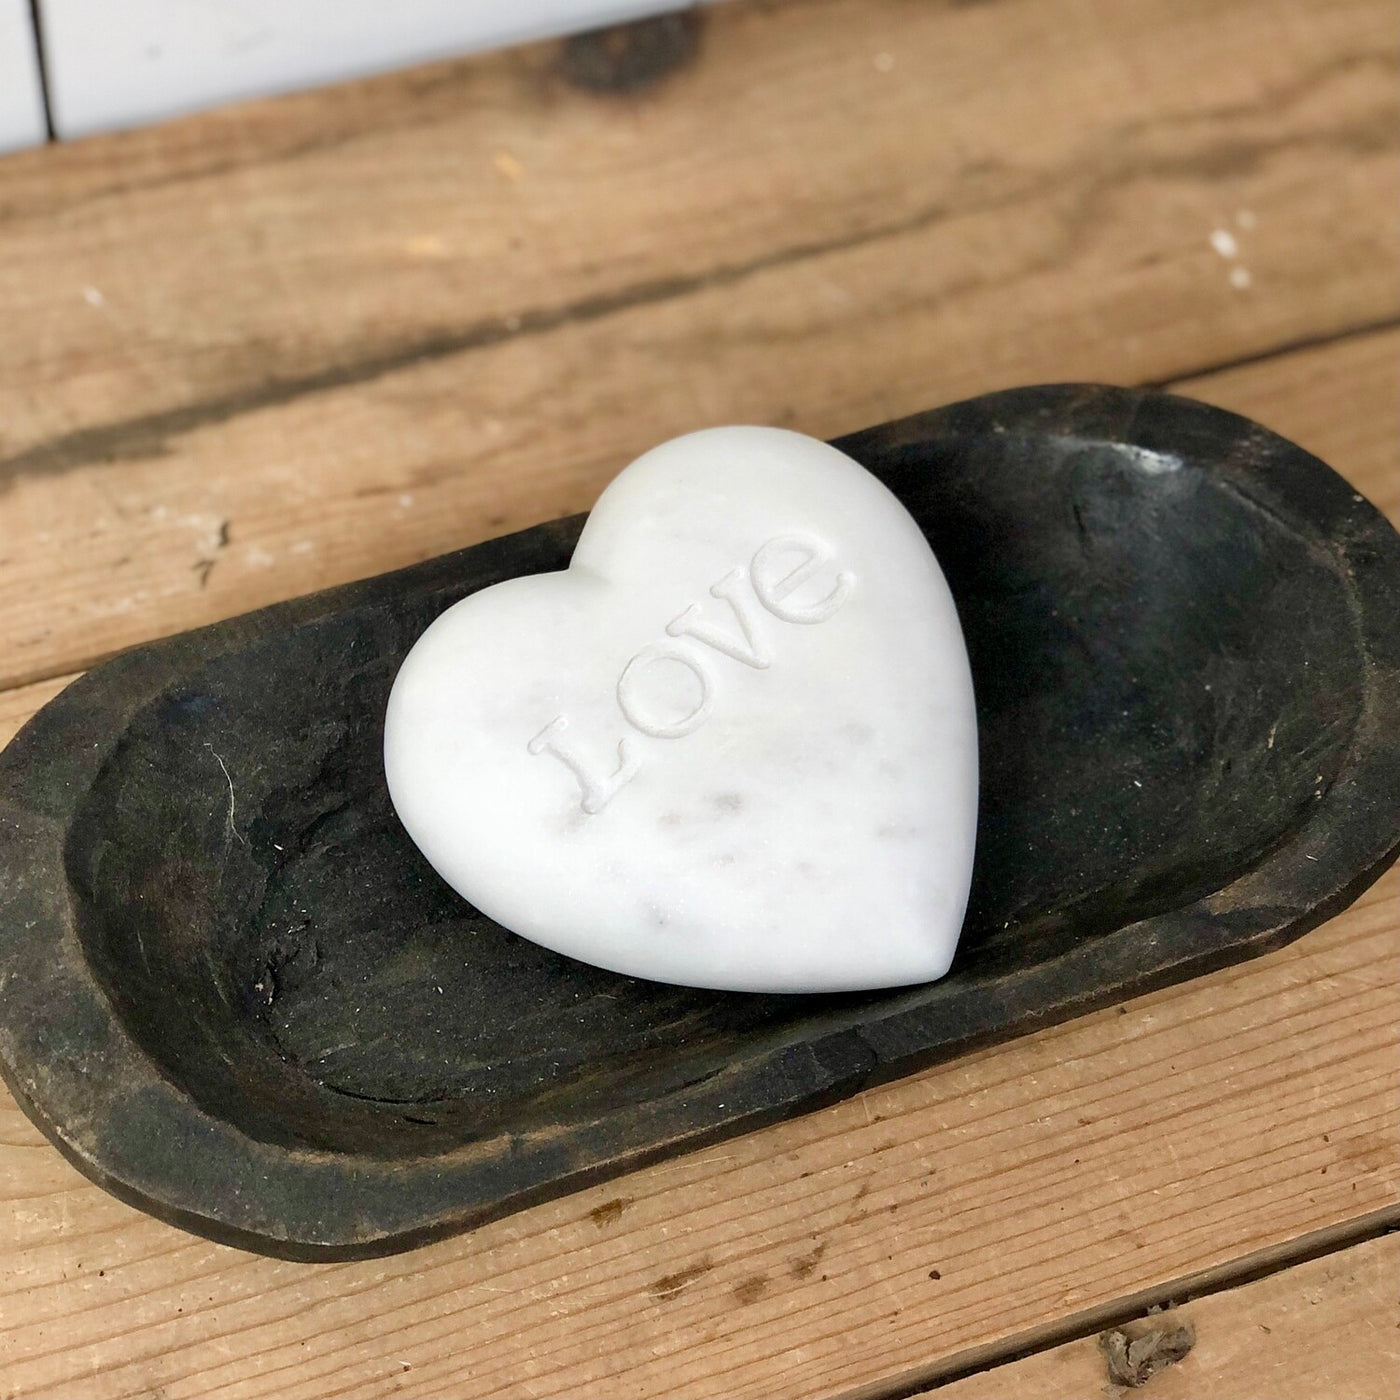 Soapstone Heart with "Love" Engraved